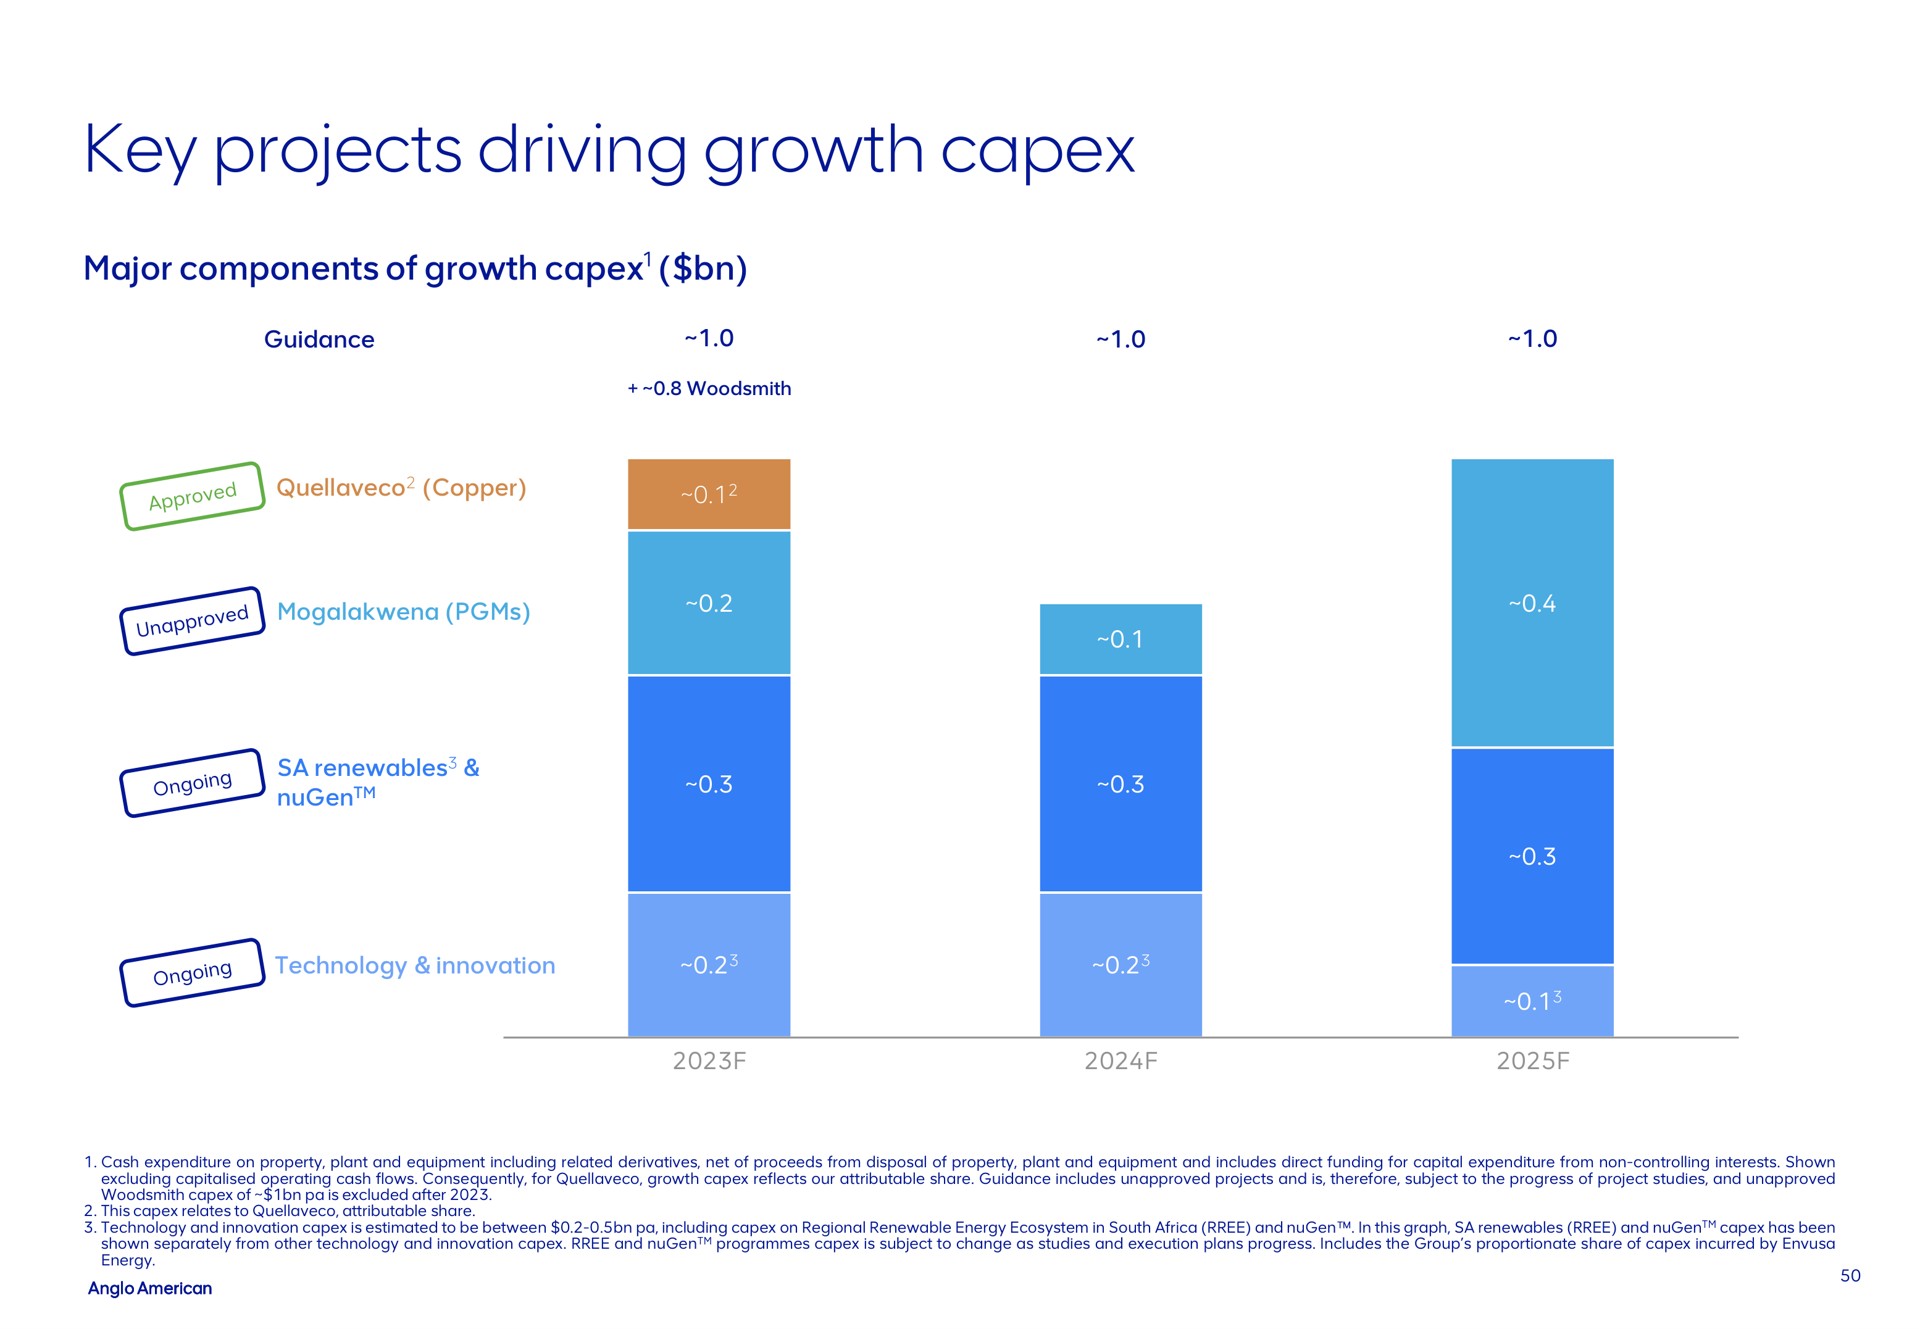 key projects driving growth | AngloAmerican